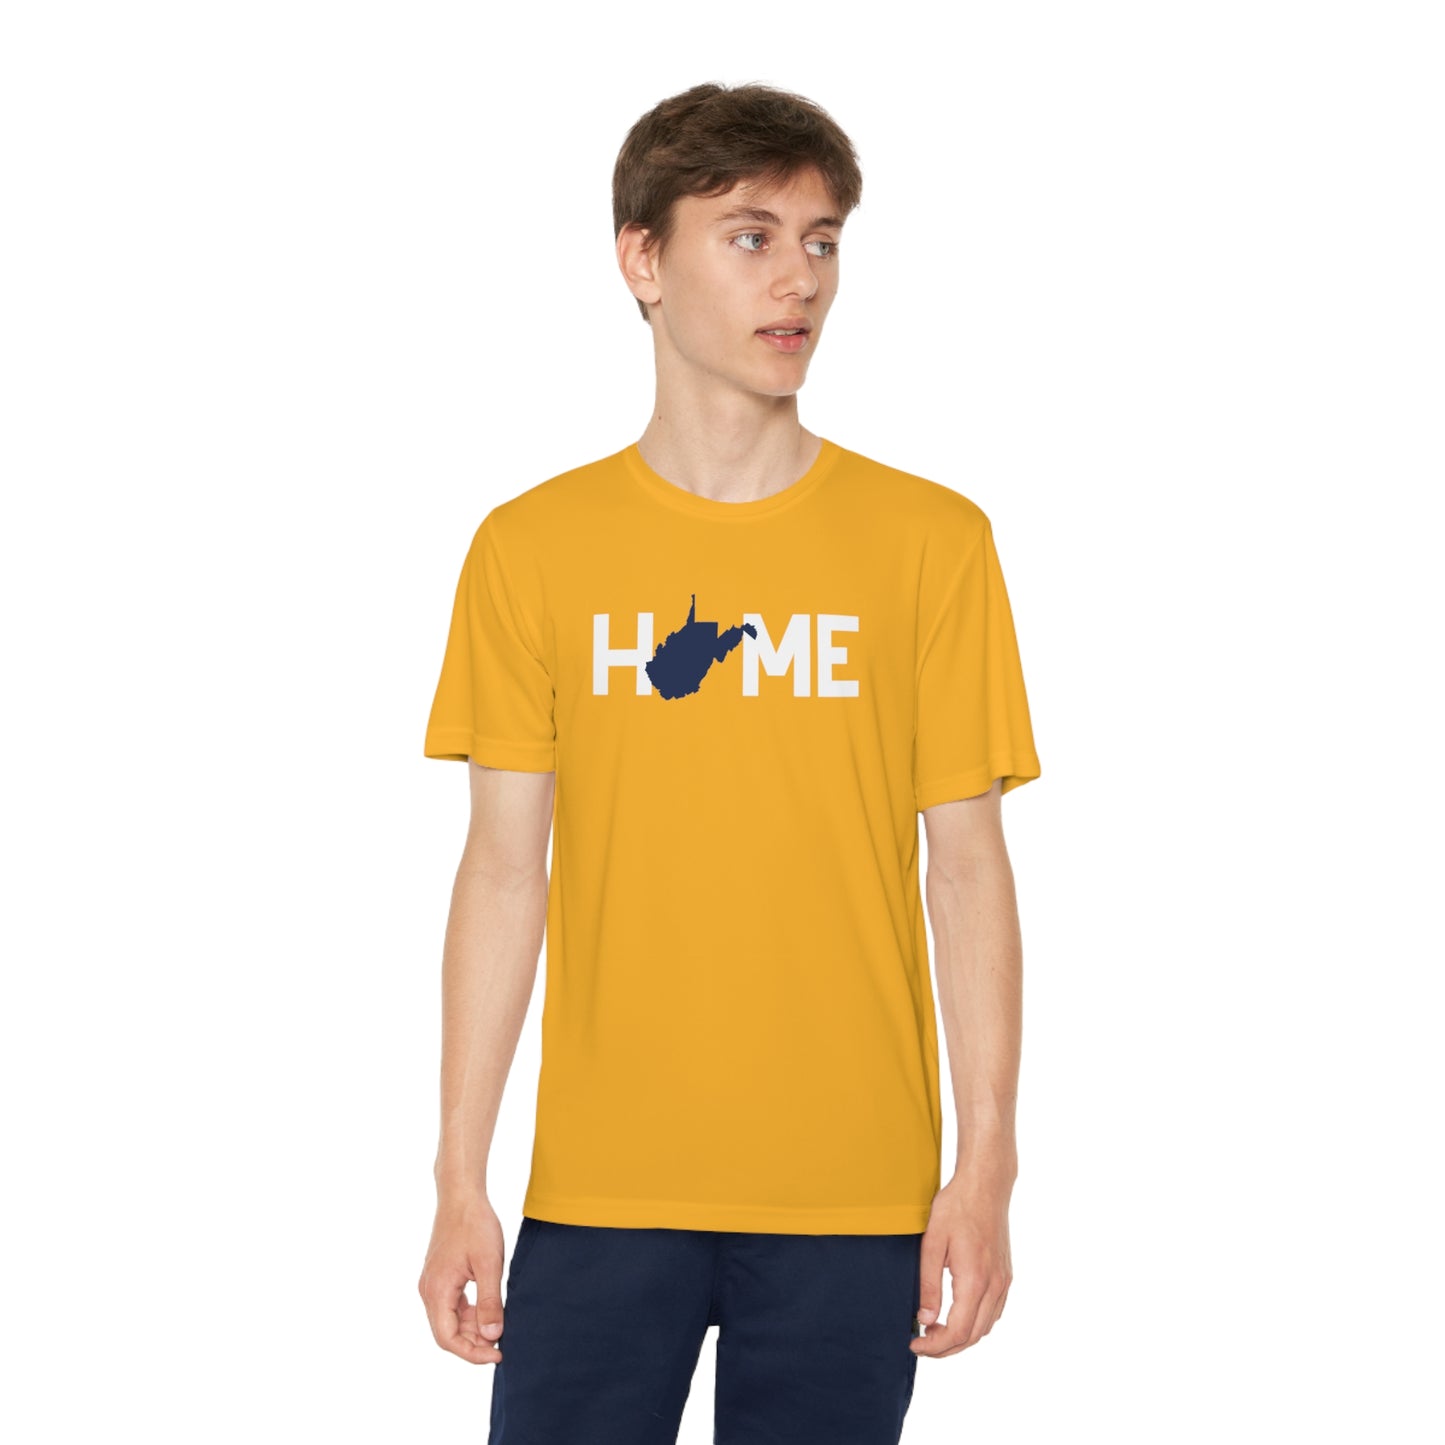 HOME (WV State Shape)-Youth Competitor Tee